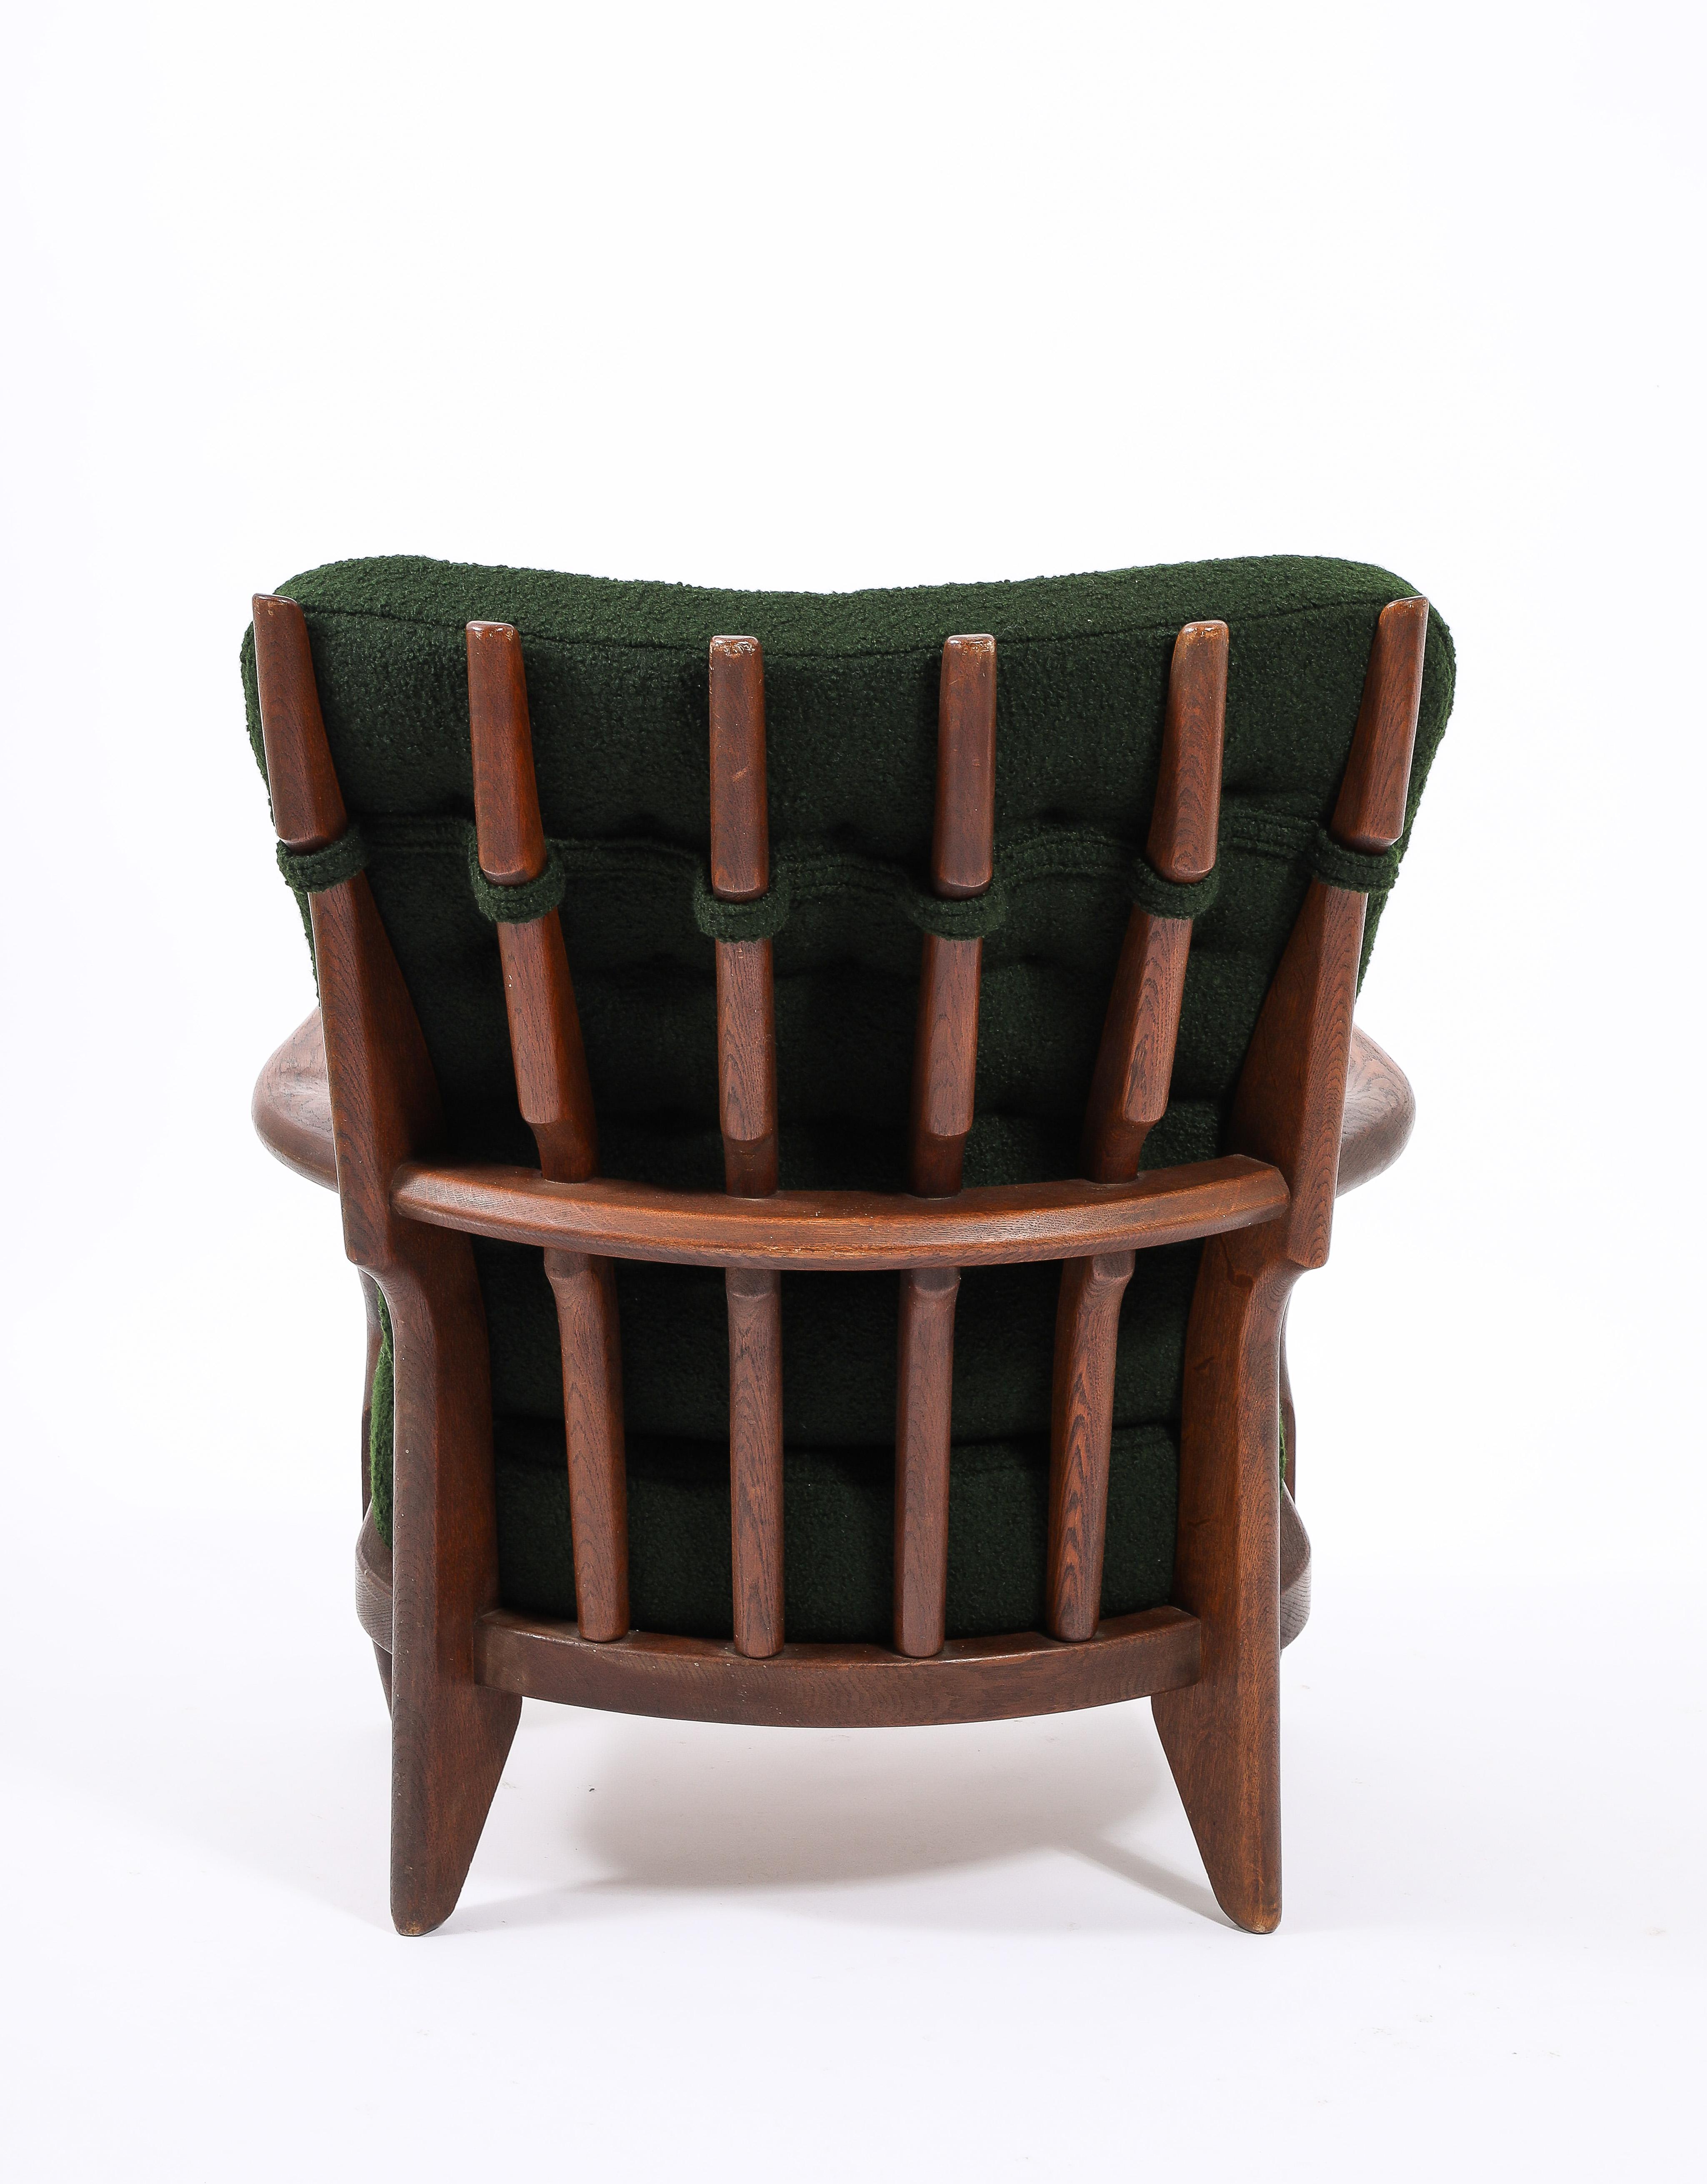 Guillerme & Chambron Petit Repos Armchair in Green Bouclé, France 1950's For Sale 1